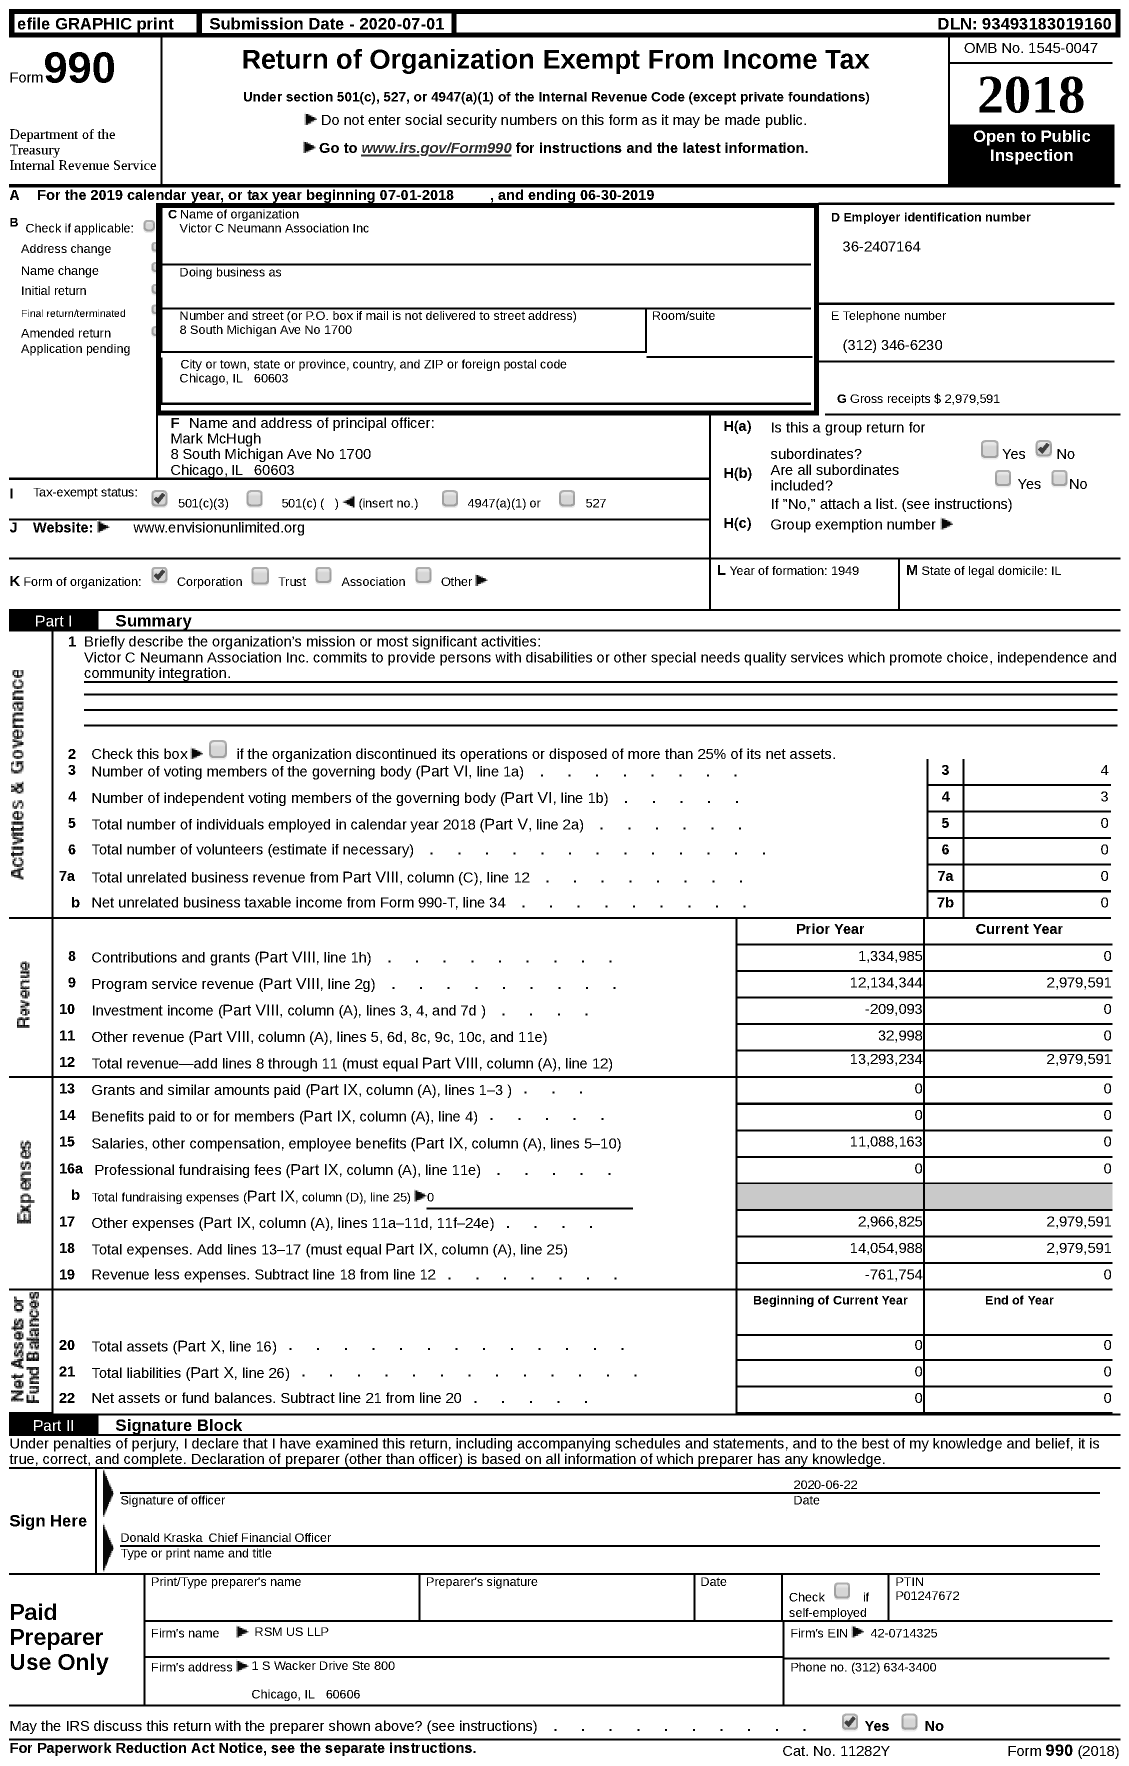 Image of first page of 2018 Form 990 for envision UNLIMITED / Neumann Family Services